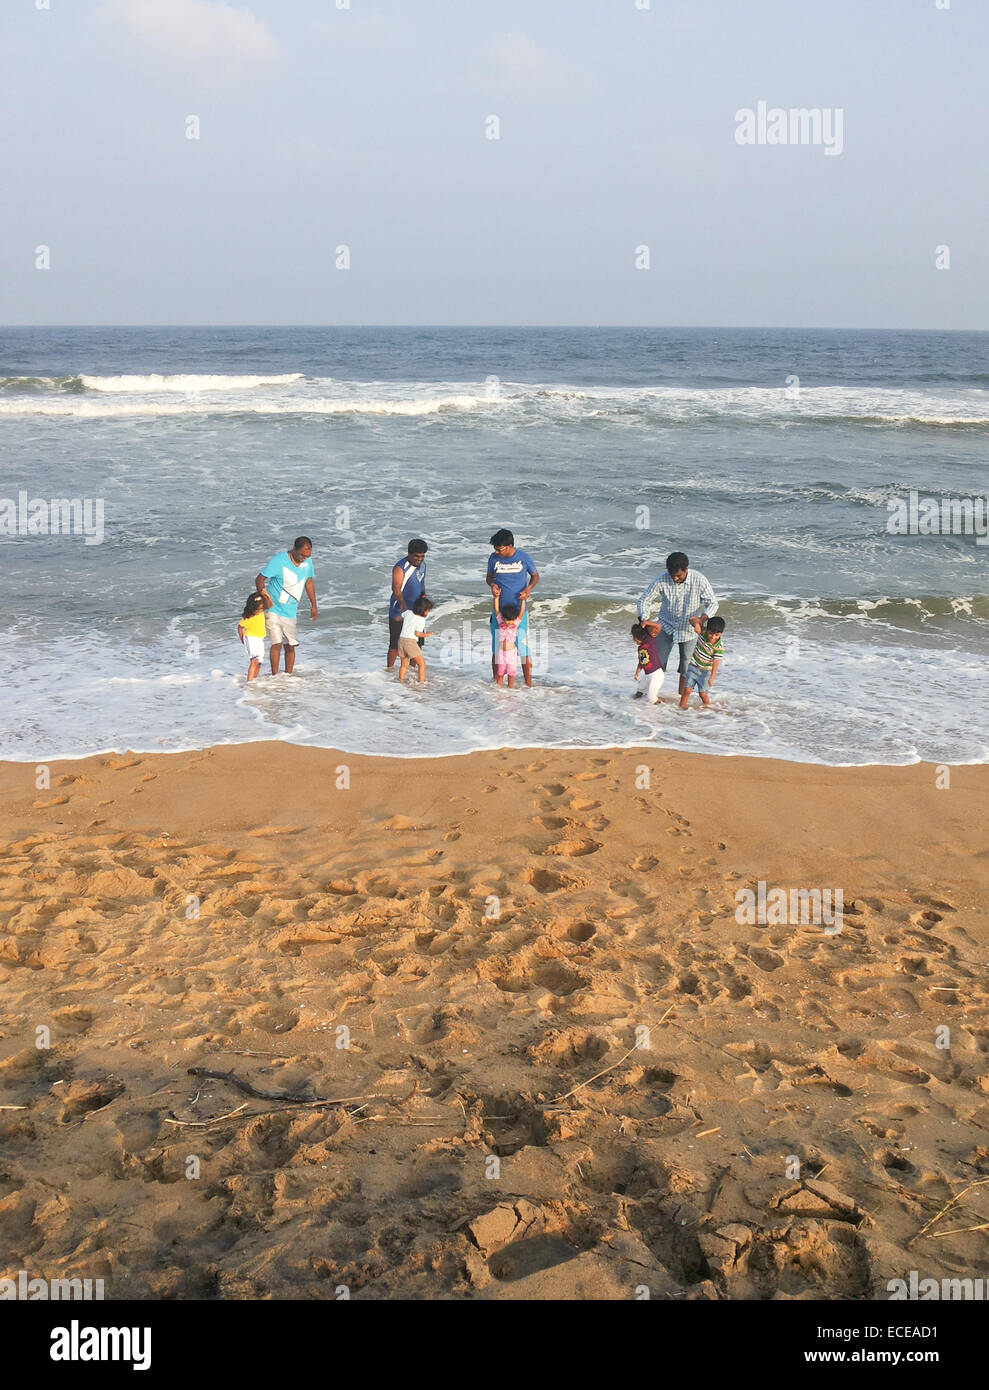 India, Fathers and children (2-7) playing on beach Stock Photo